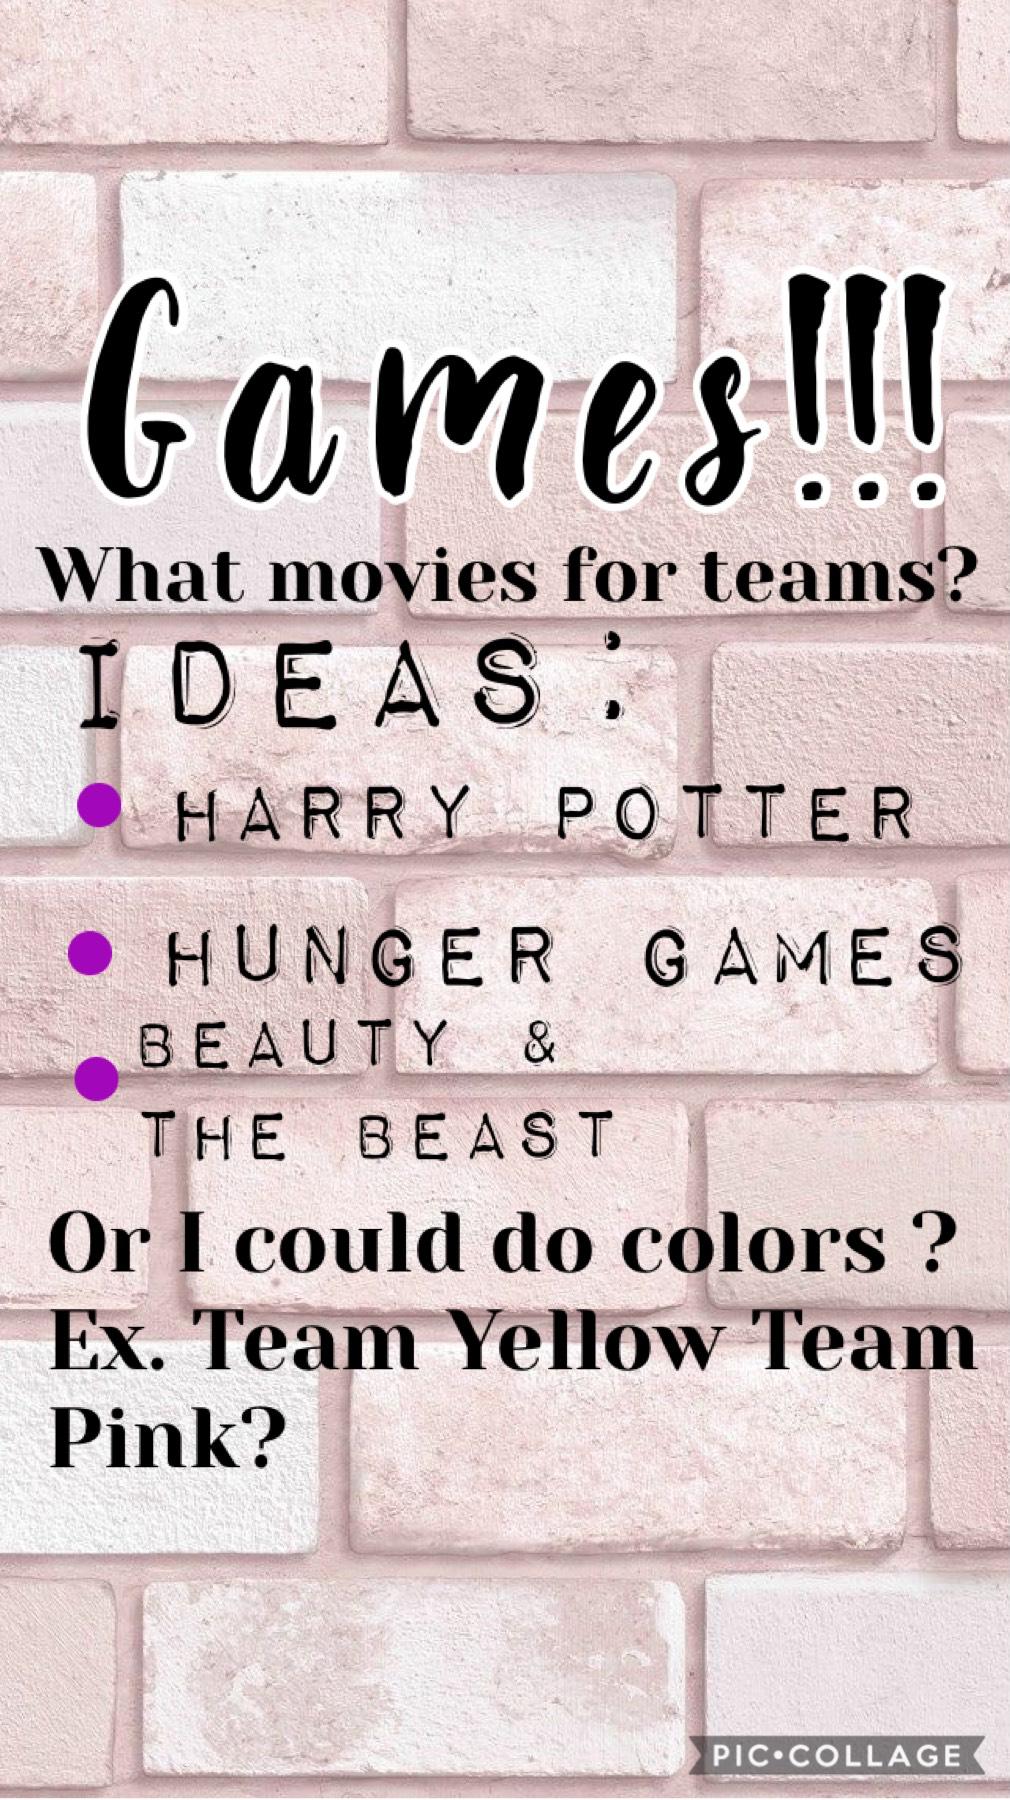 🎨TAP🎨
Comment what movies I should do!! 
Or comment if you like the colors idea better! If you like the colors comment 4 of your favorite colors!